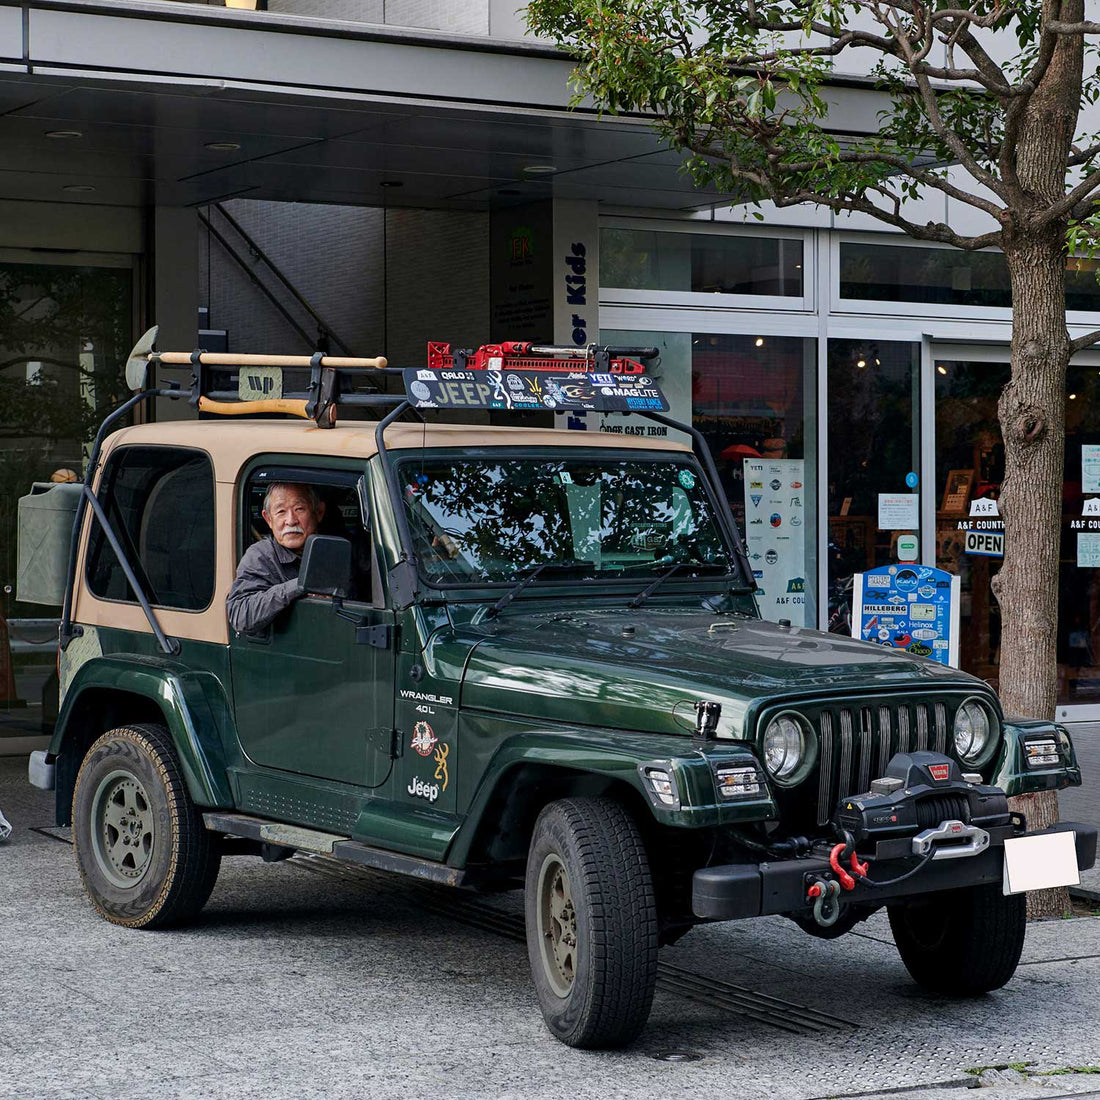 D.I.Y.文化が息づく、アメリカを代表するクルマ〈’97 JEEP TJ WRANGLER〉